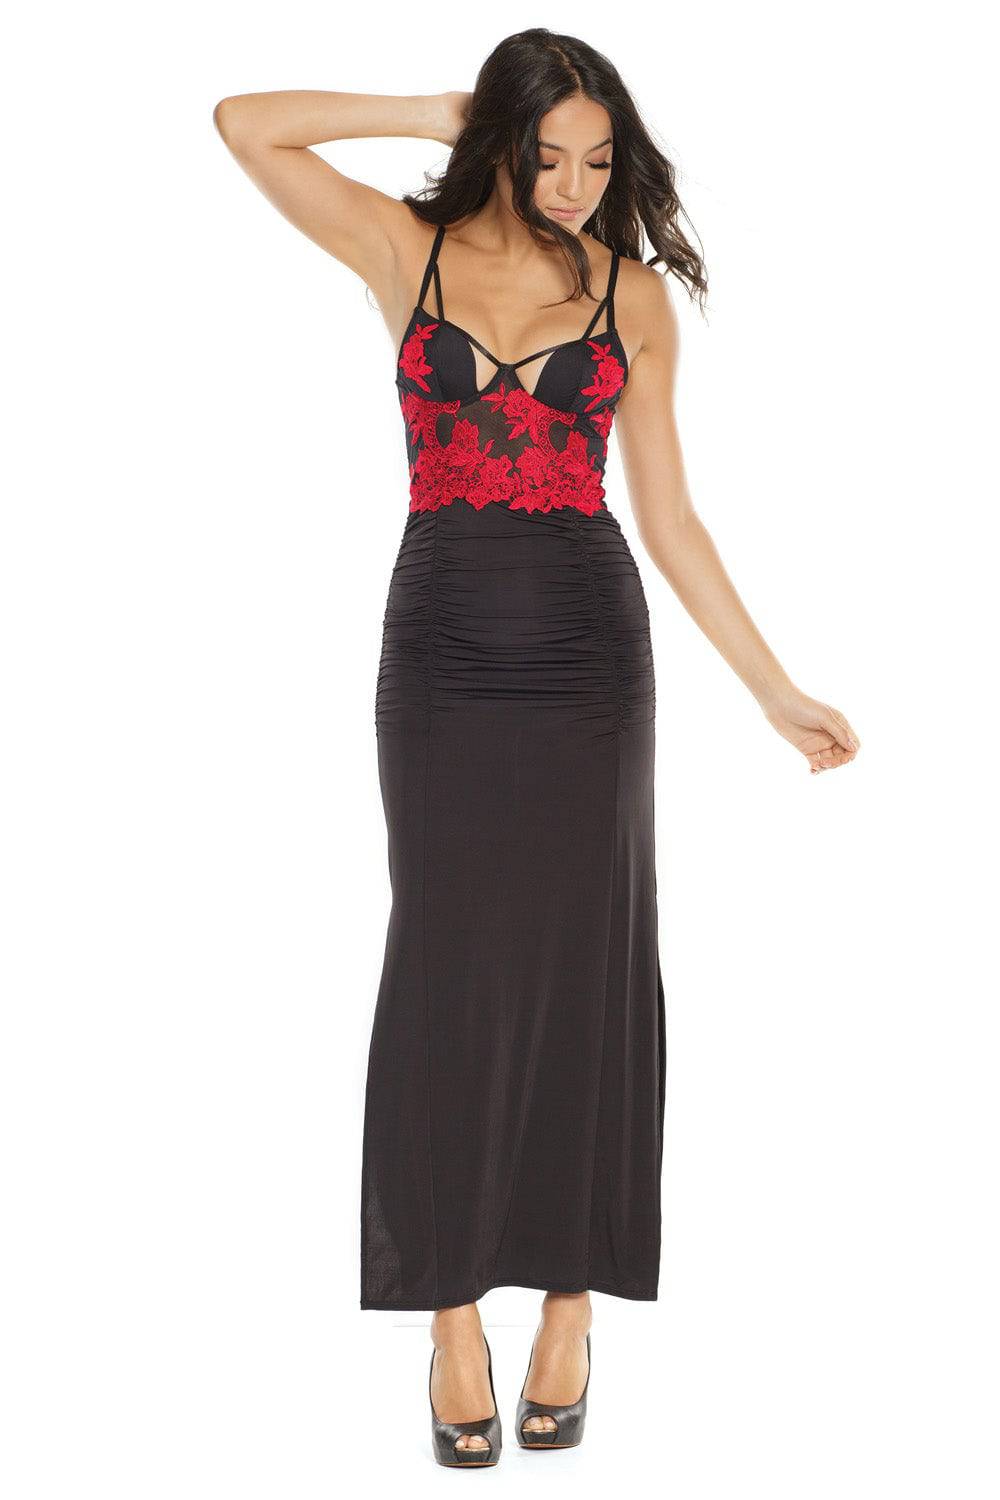 Coquette - 3870 - Embroidered Gown - Black/Red - Stag Shop